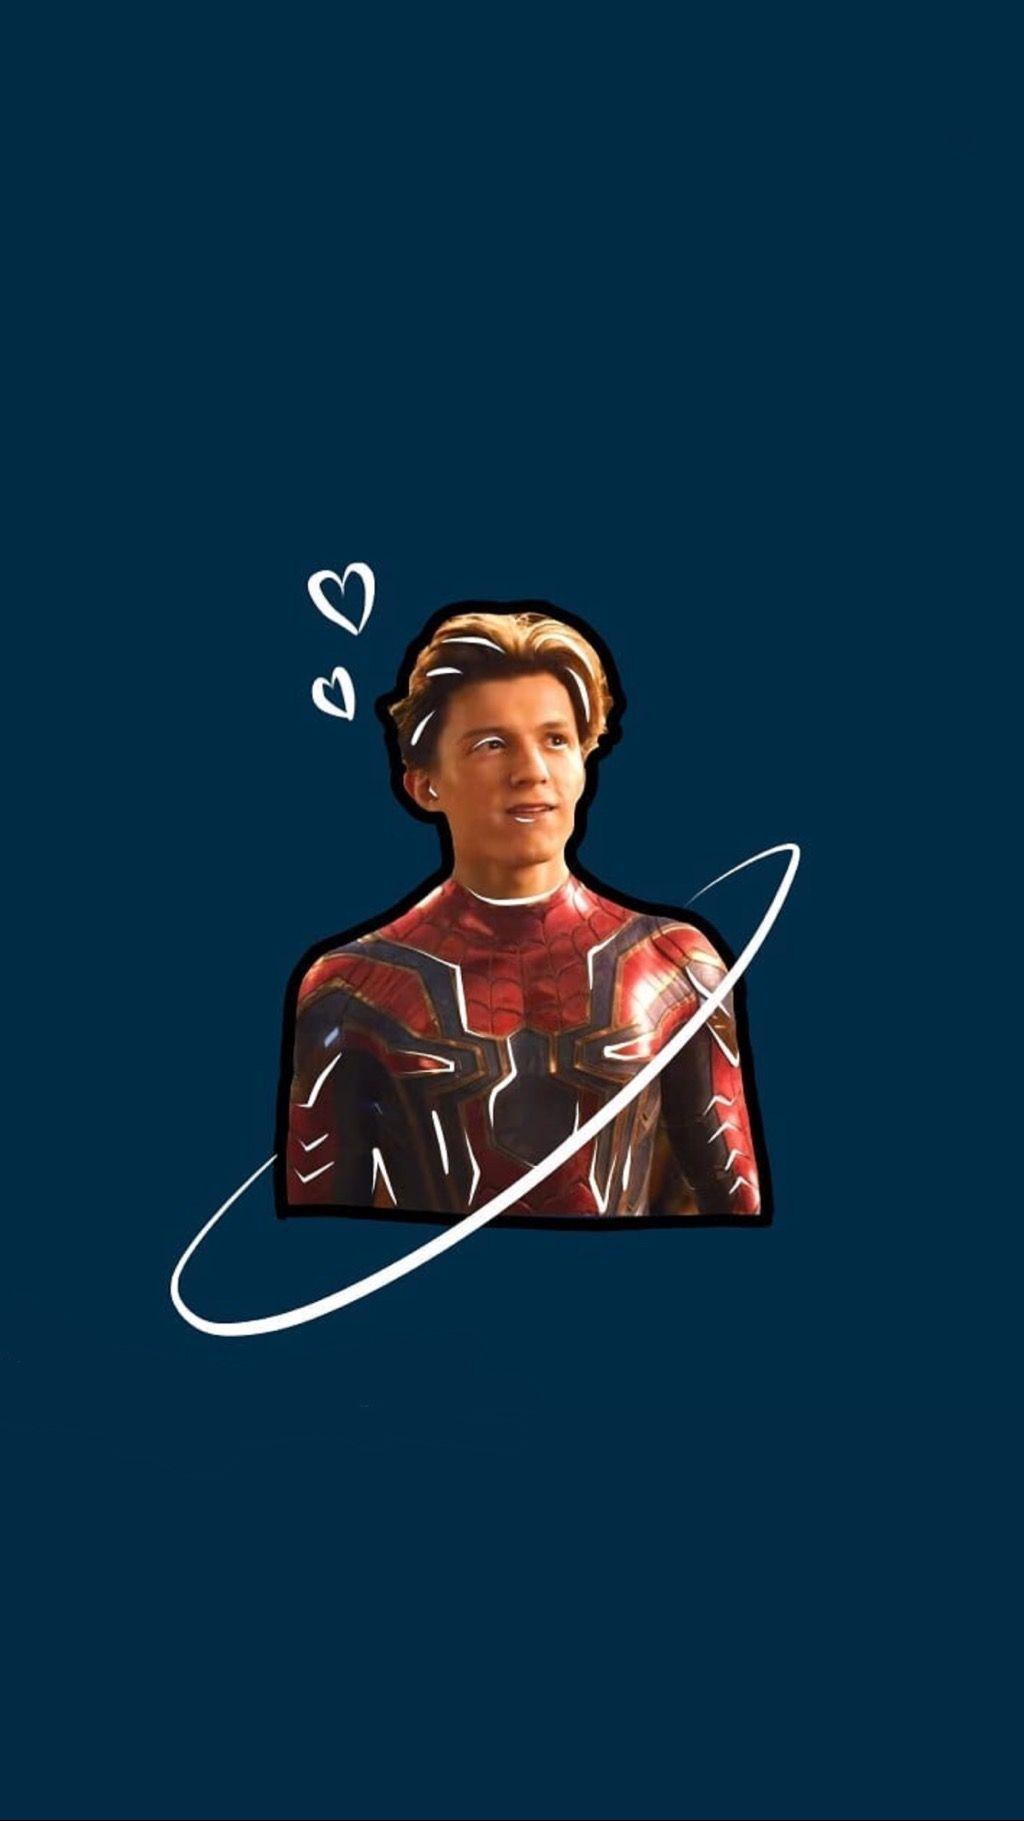 IPhone wallpaper of Tom Holland as Spiderman with a blue background - Tom Holland